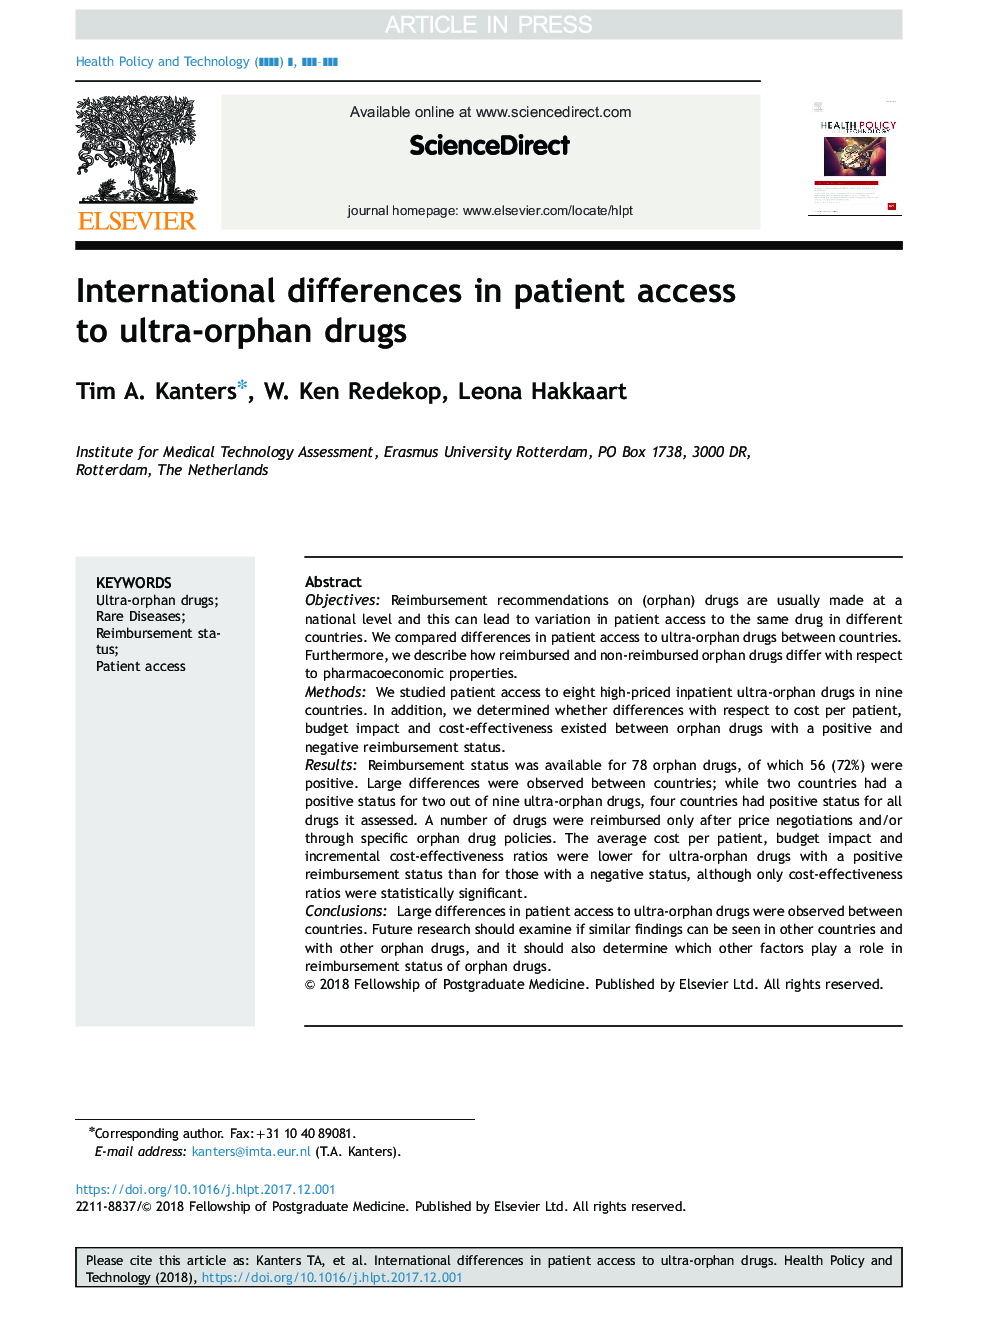 International differences in patient access to ultra-orphan drugs